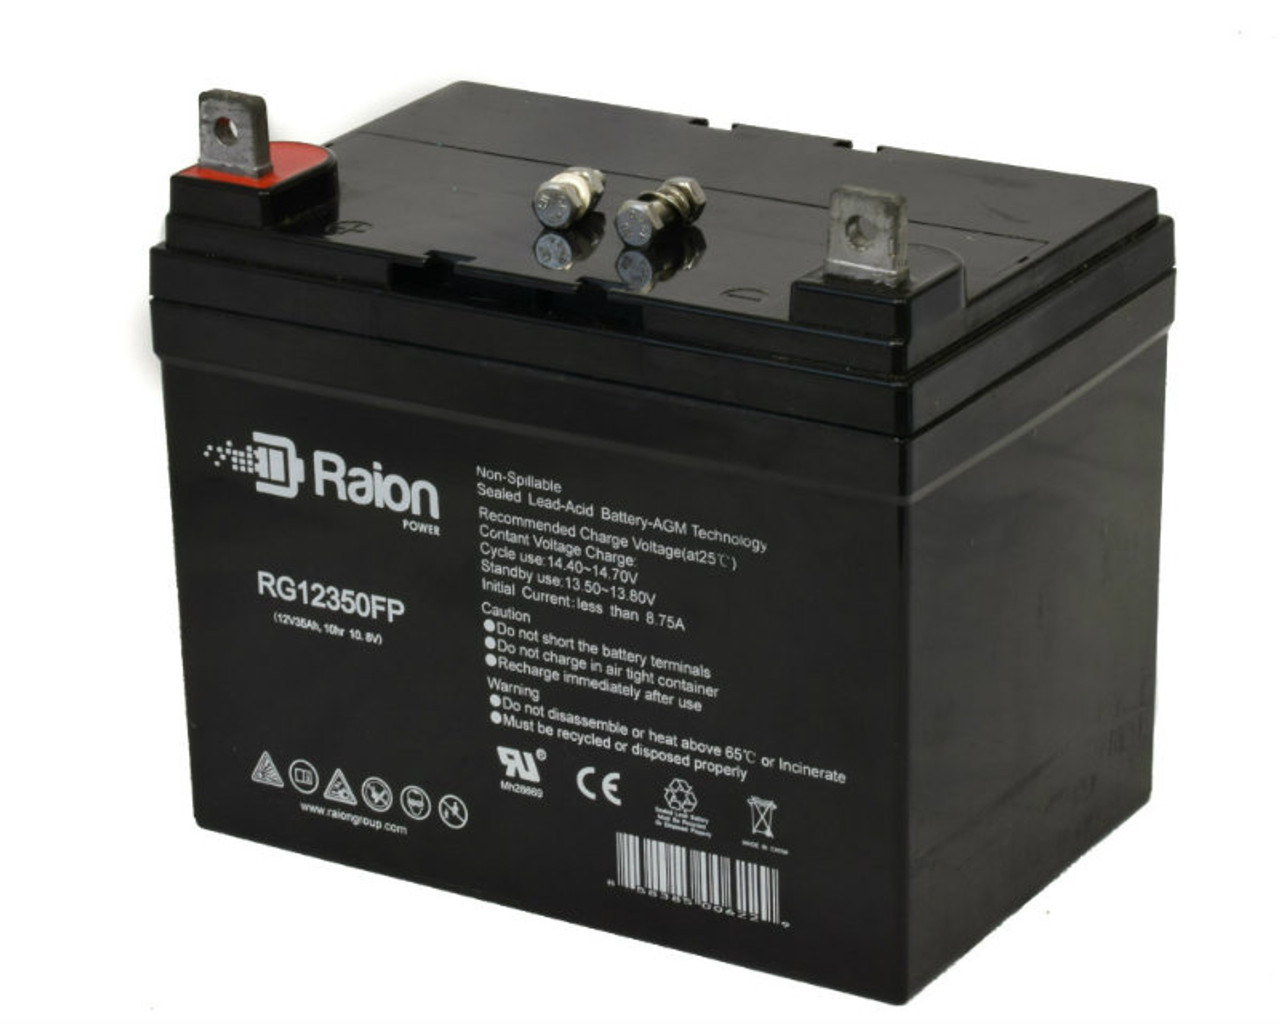 Raion Power Replacement 12V 35Ah RG12350FP Battery for J.I. Case & Case IH 118